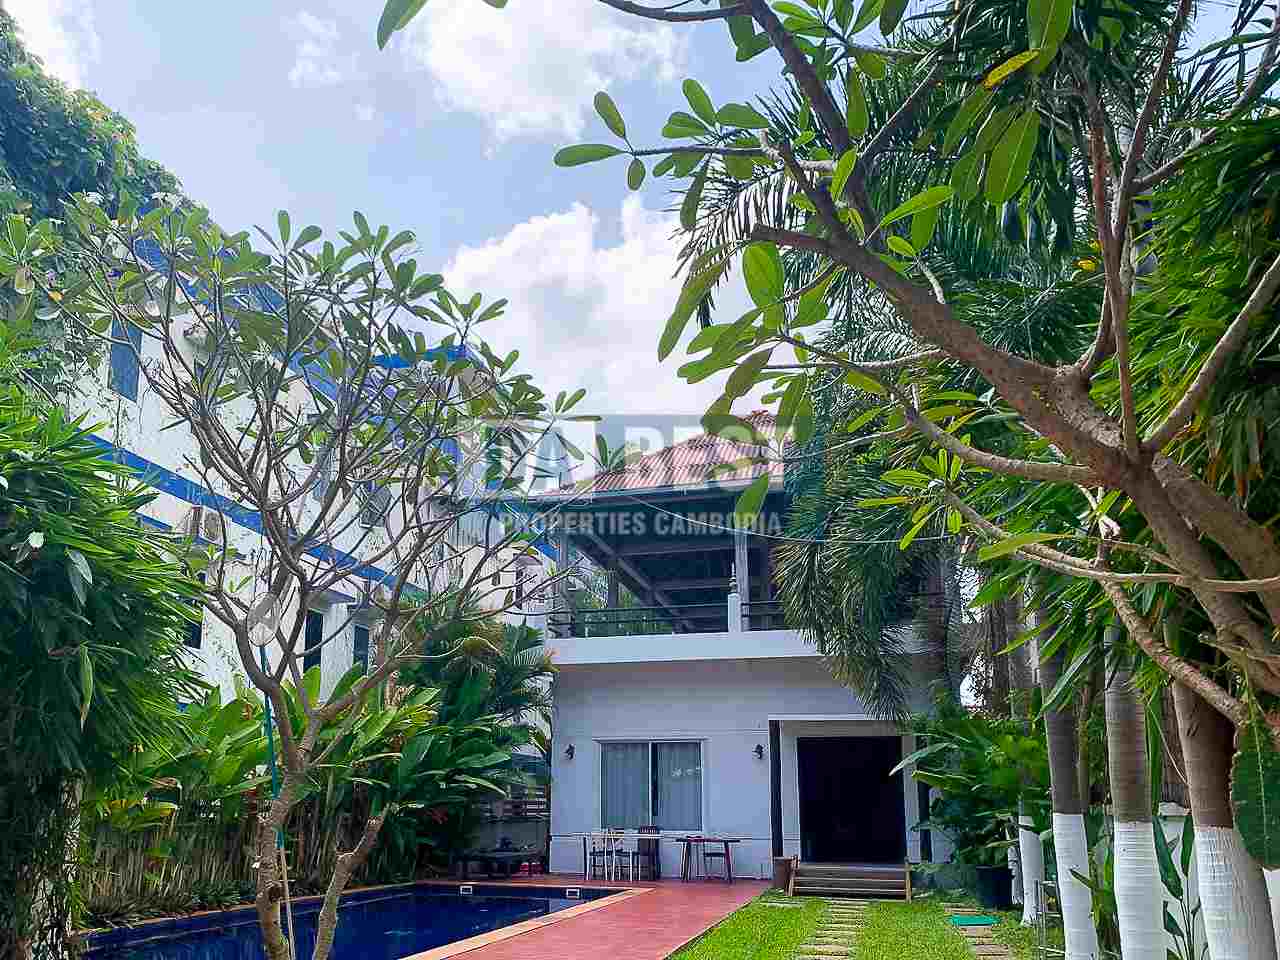 Private Villa 3 Bedroom With Swimming Pool For sale in Siem Reap - Building